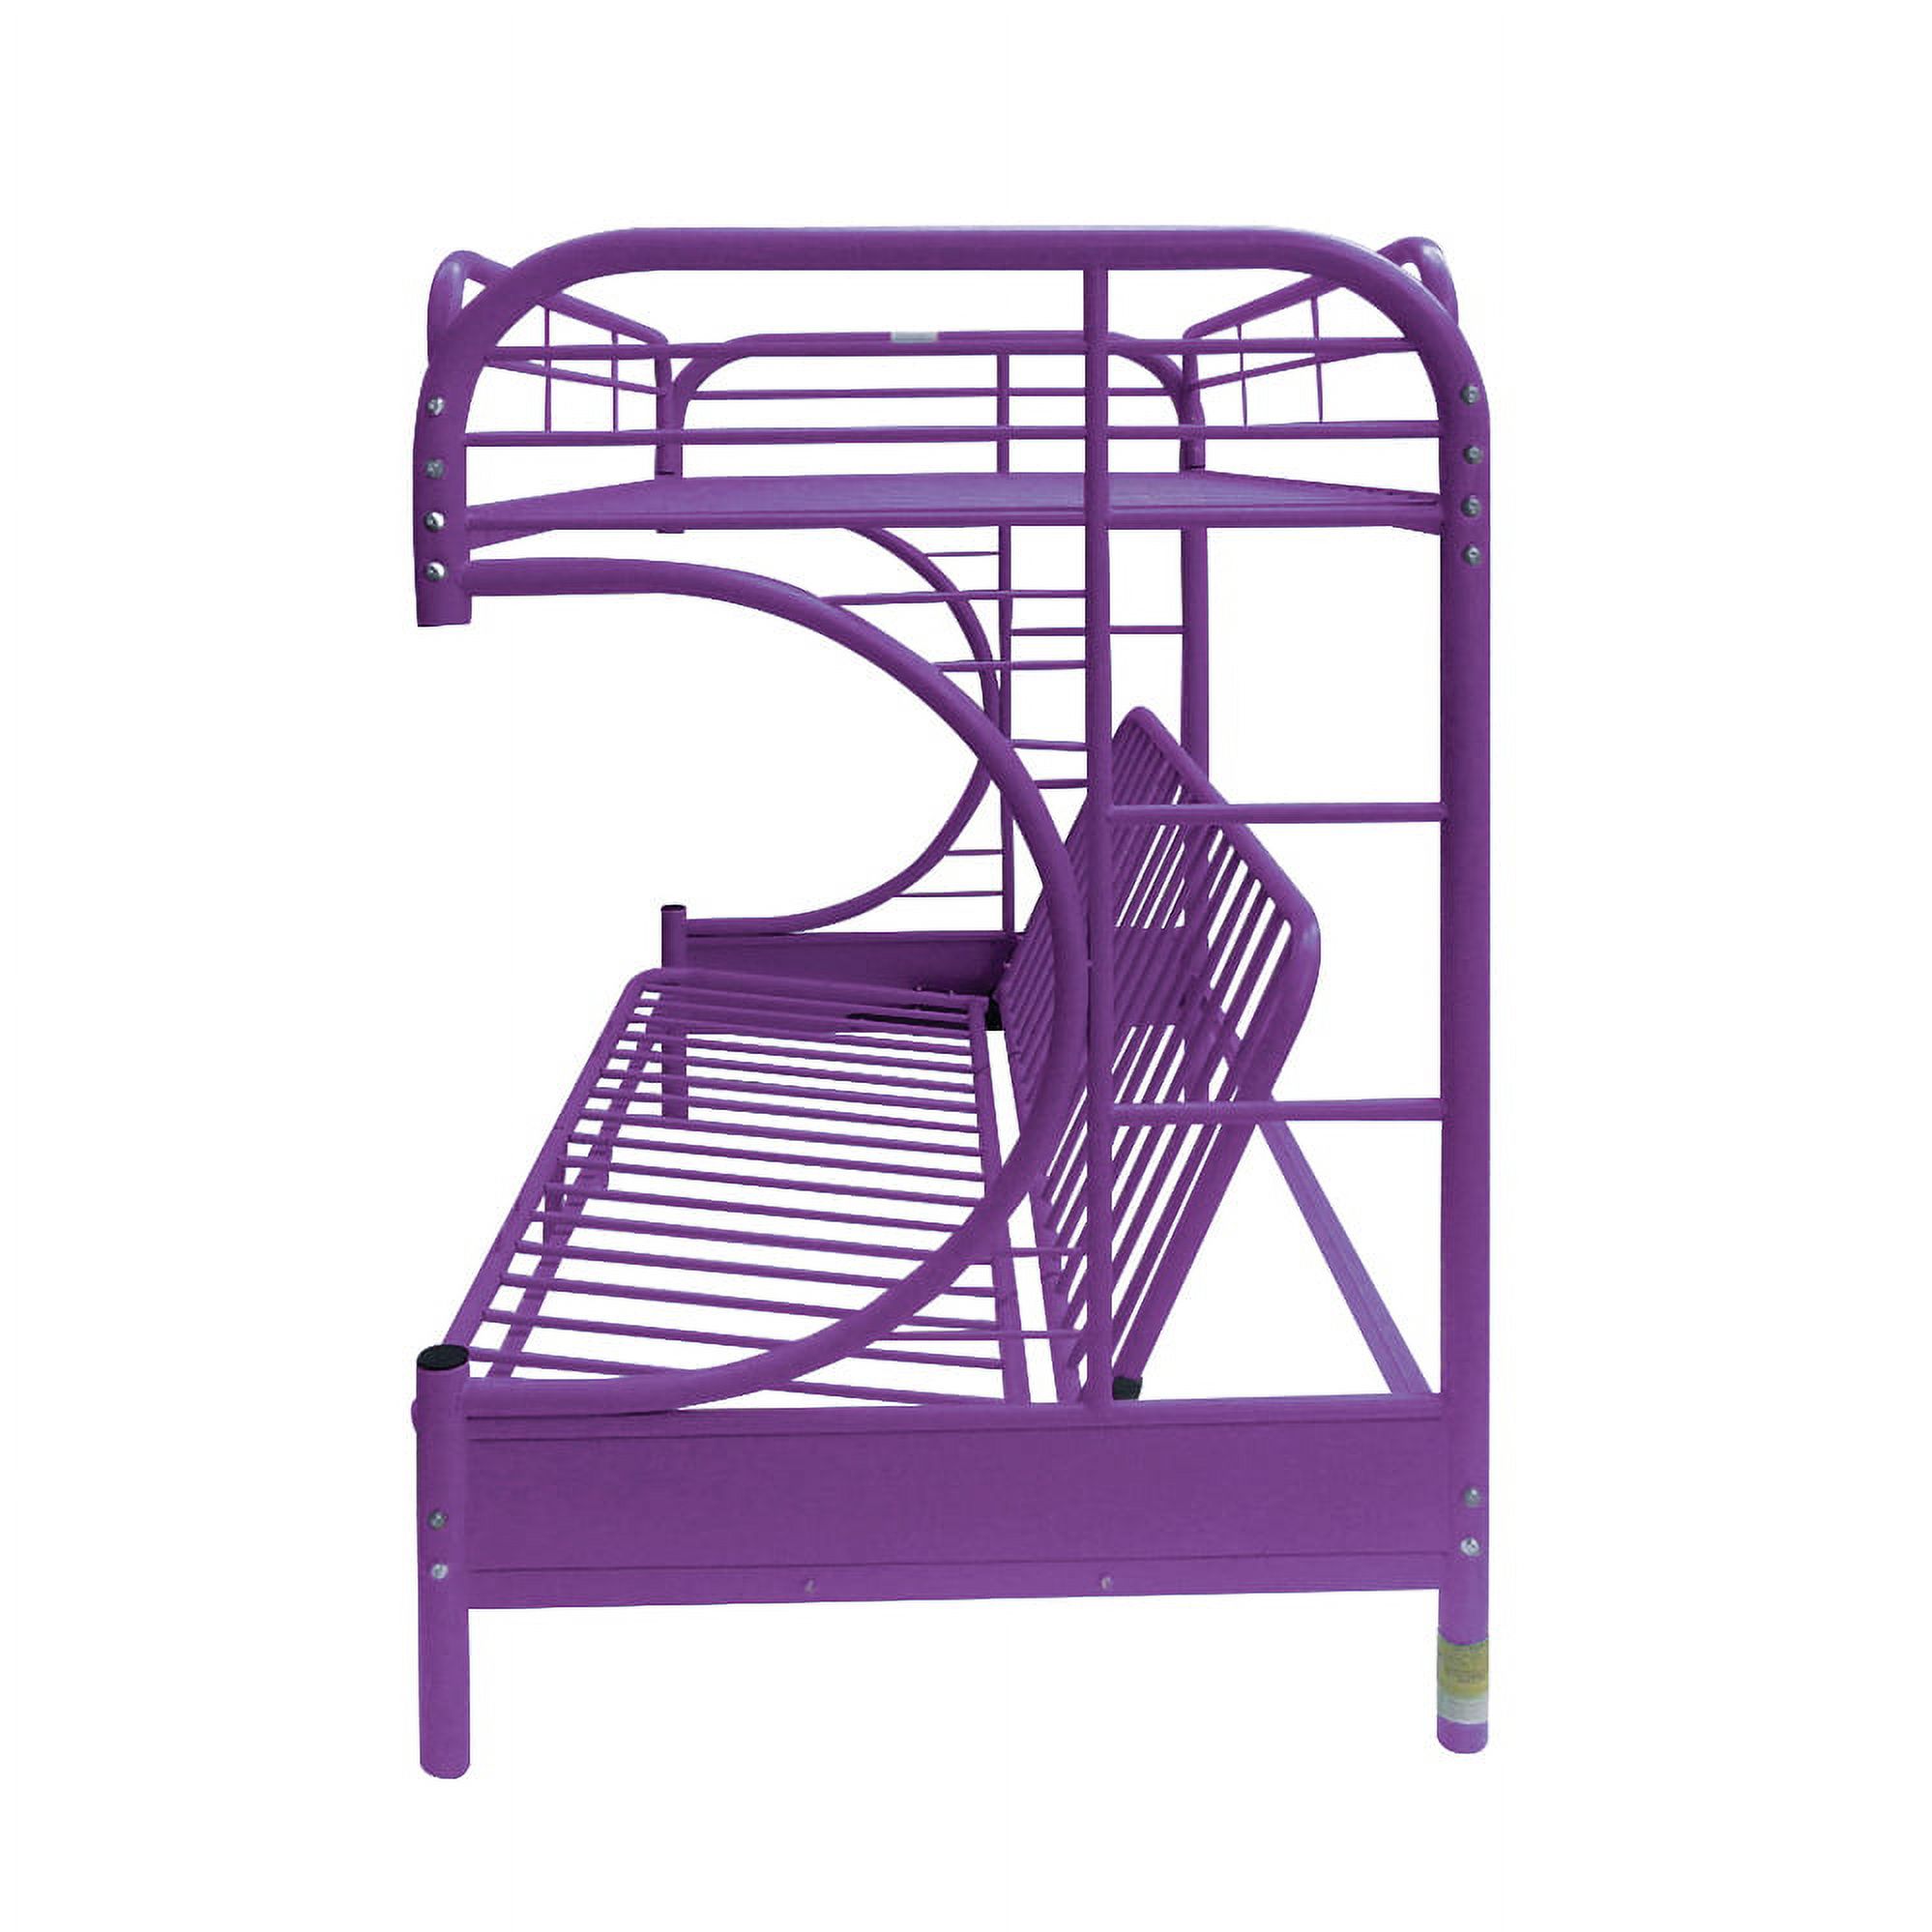 ACME Furniture Eclipse Twin over Full and Futon Bunk Bed in Purple - image 4 of 5